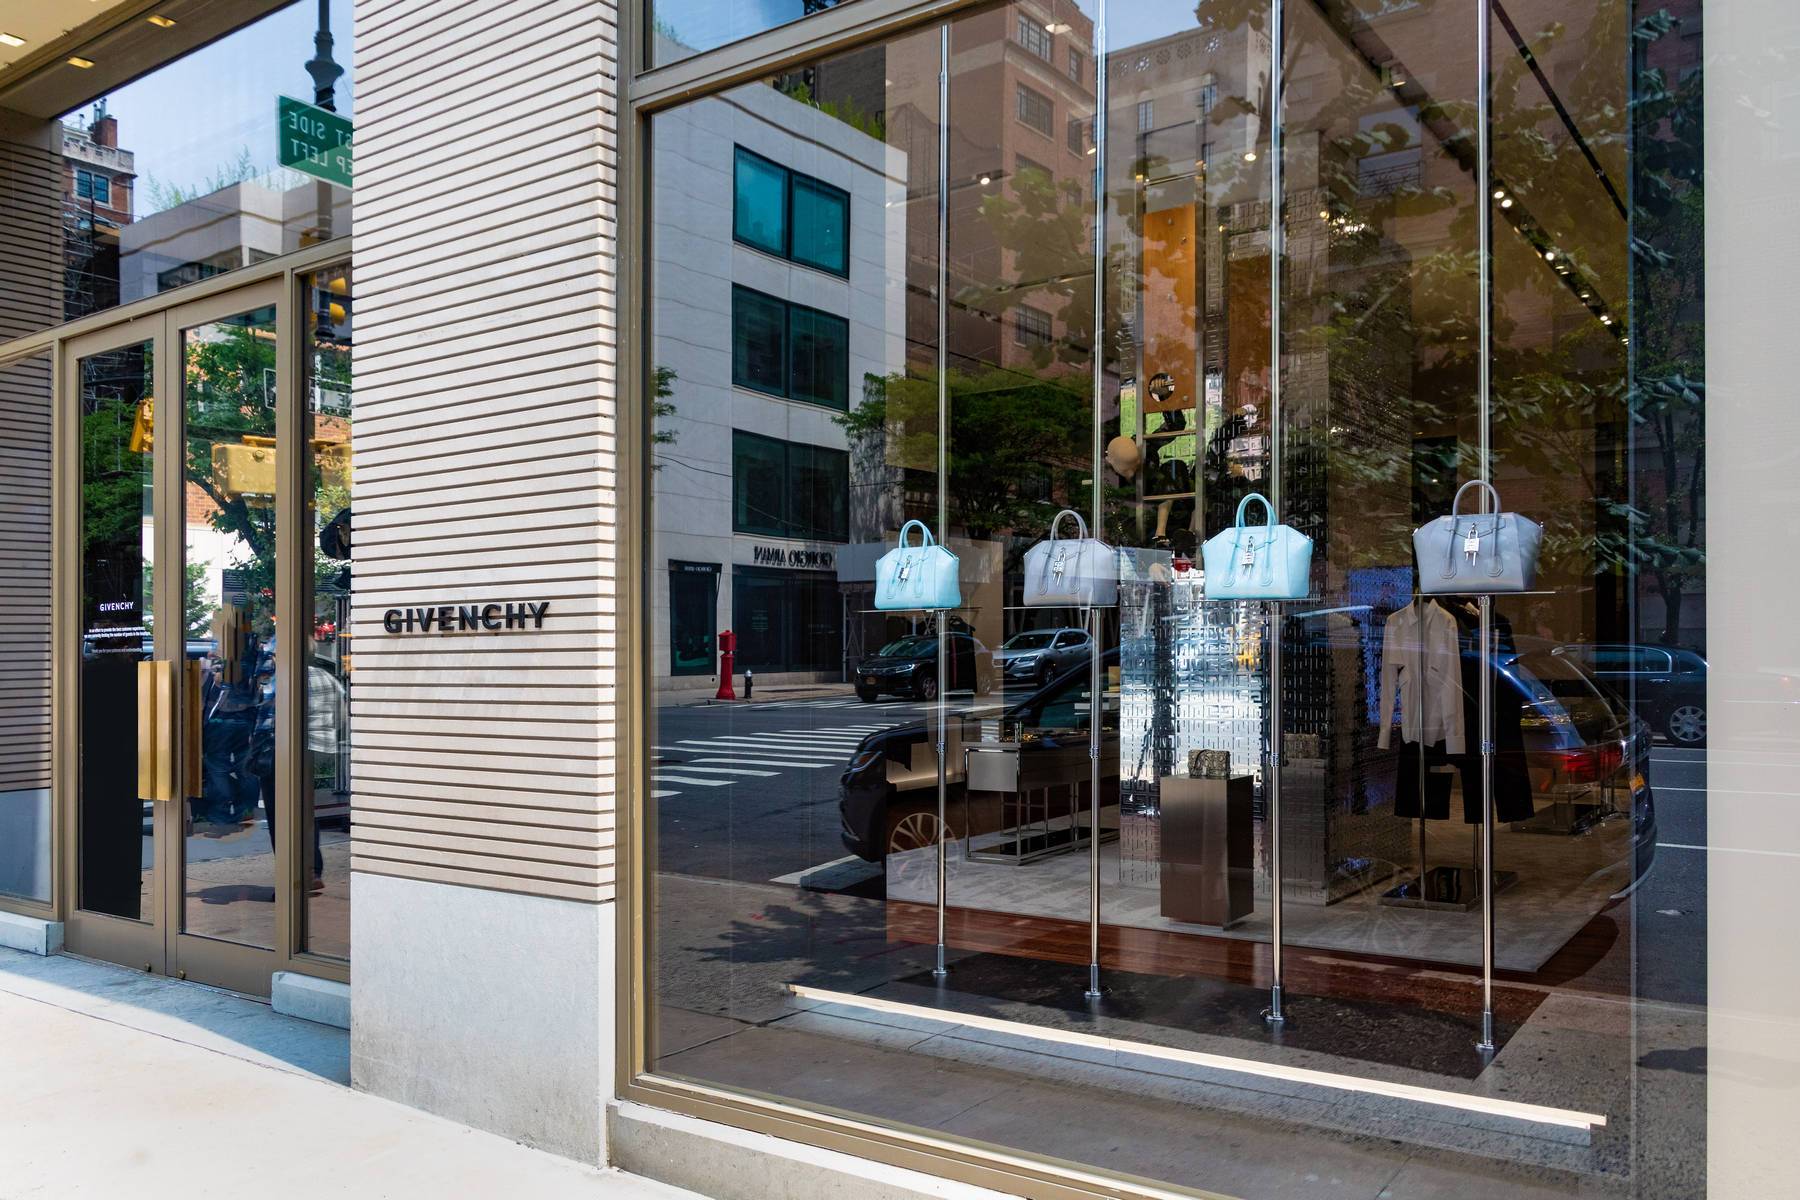 Givenchy storefront